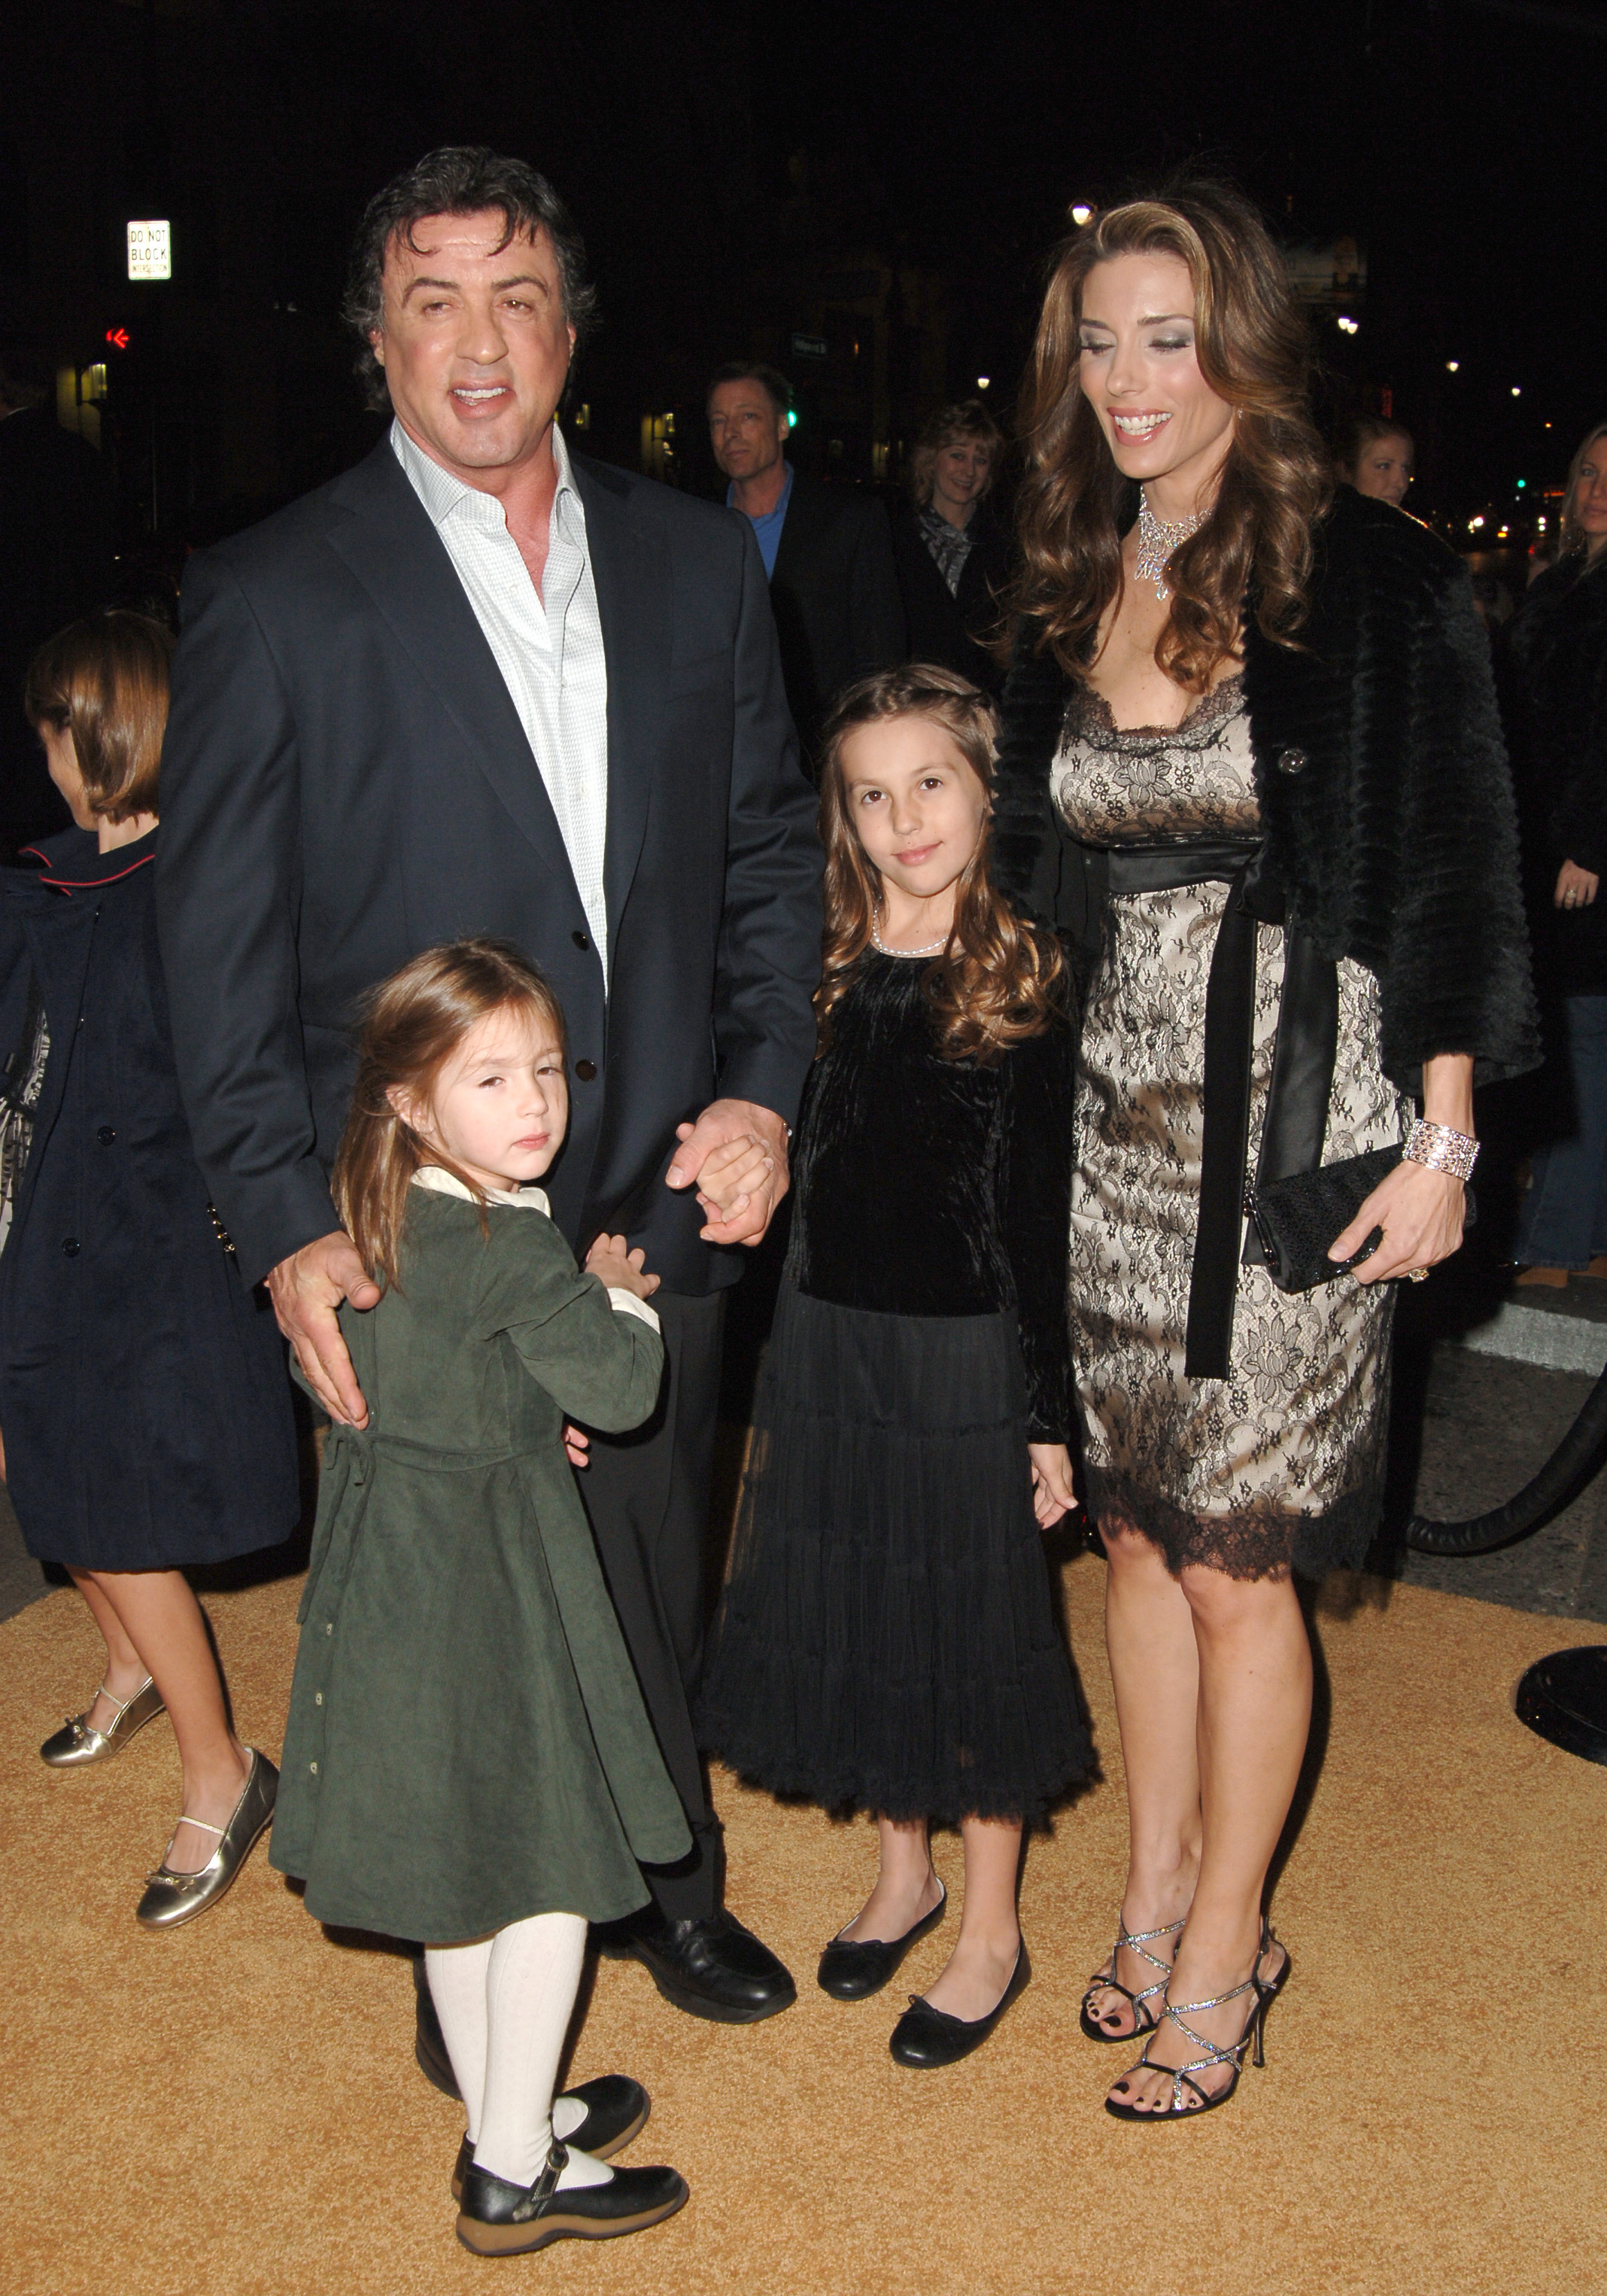 Sylvester Stallone, Jennifer Flavin, and their kids in Hollywood, California, 2006 | Source: Getty Images